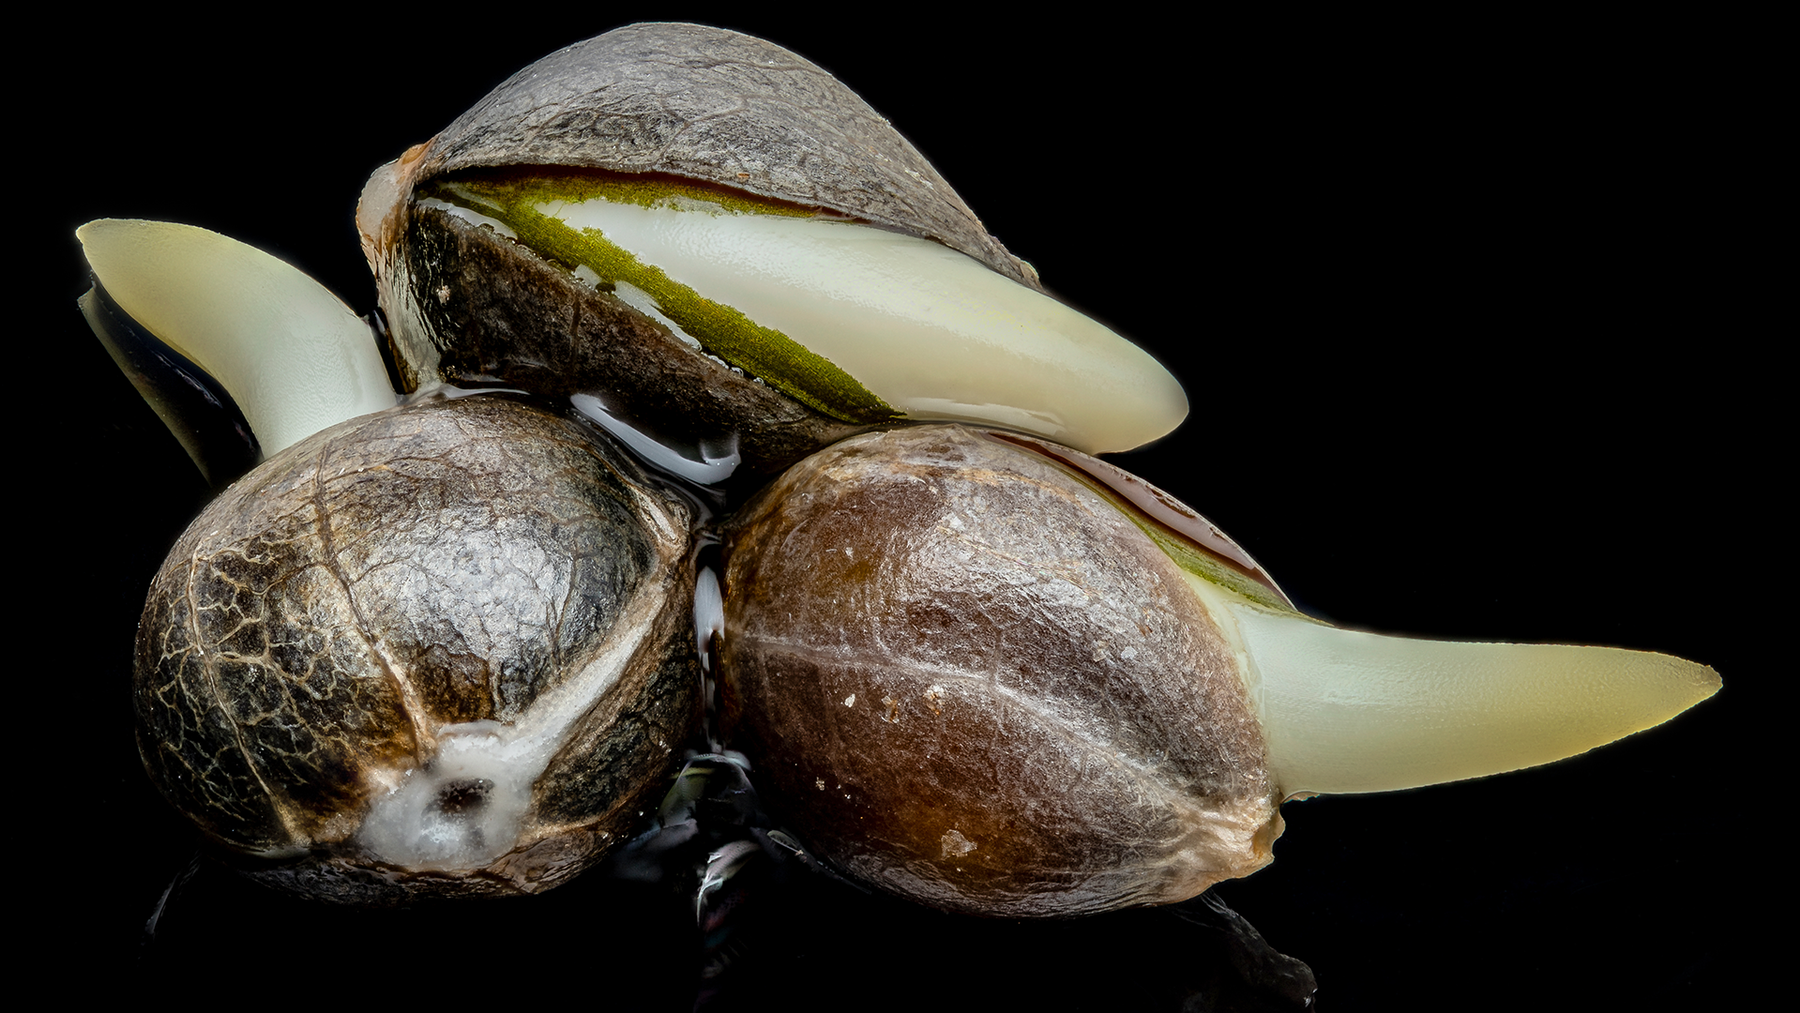 A close-up photograph of three sprouted hemp seeds on a black background.